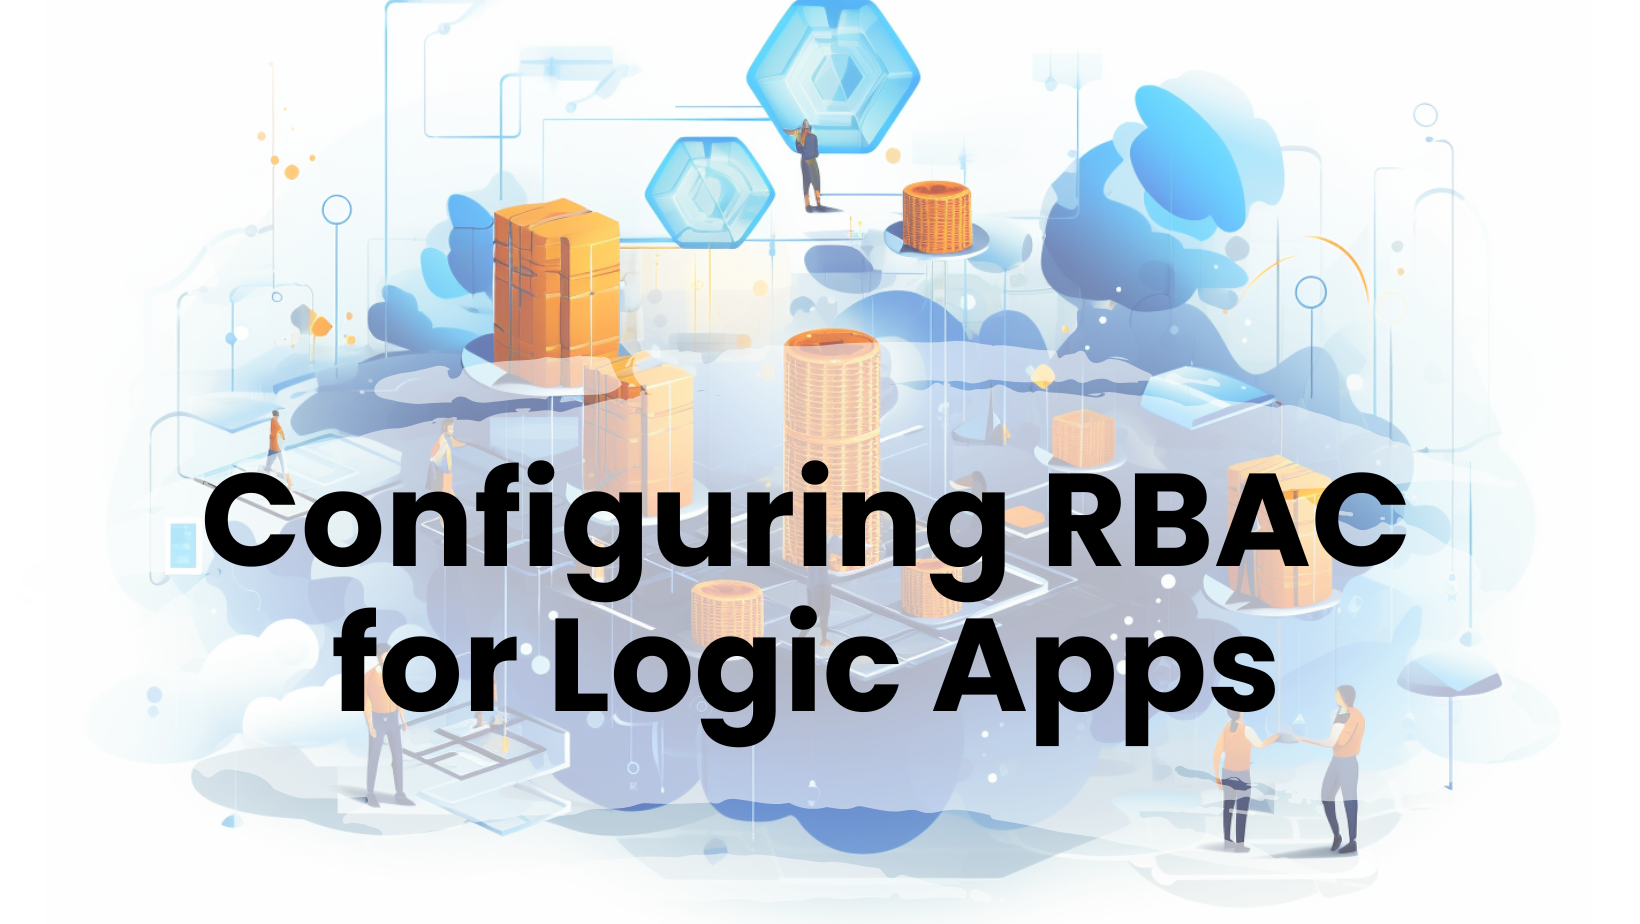 Configuring RBAC for LogicApps